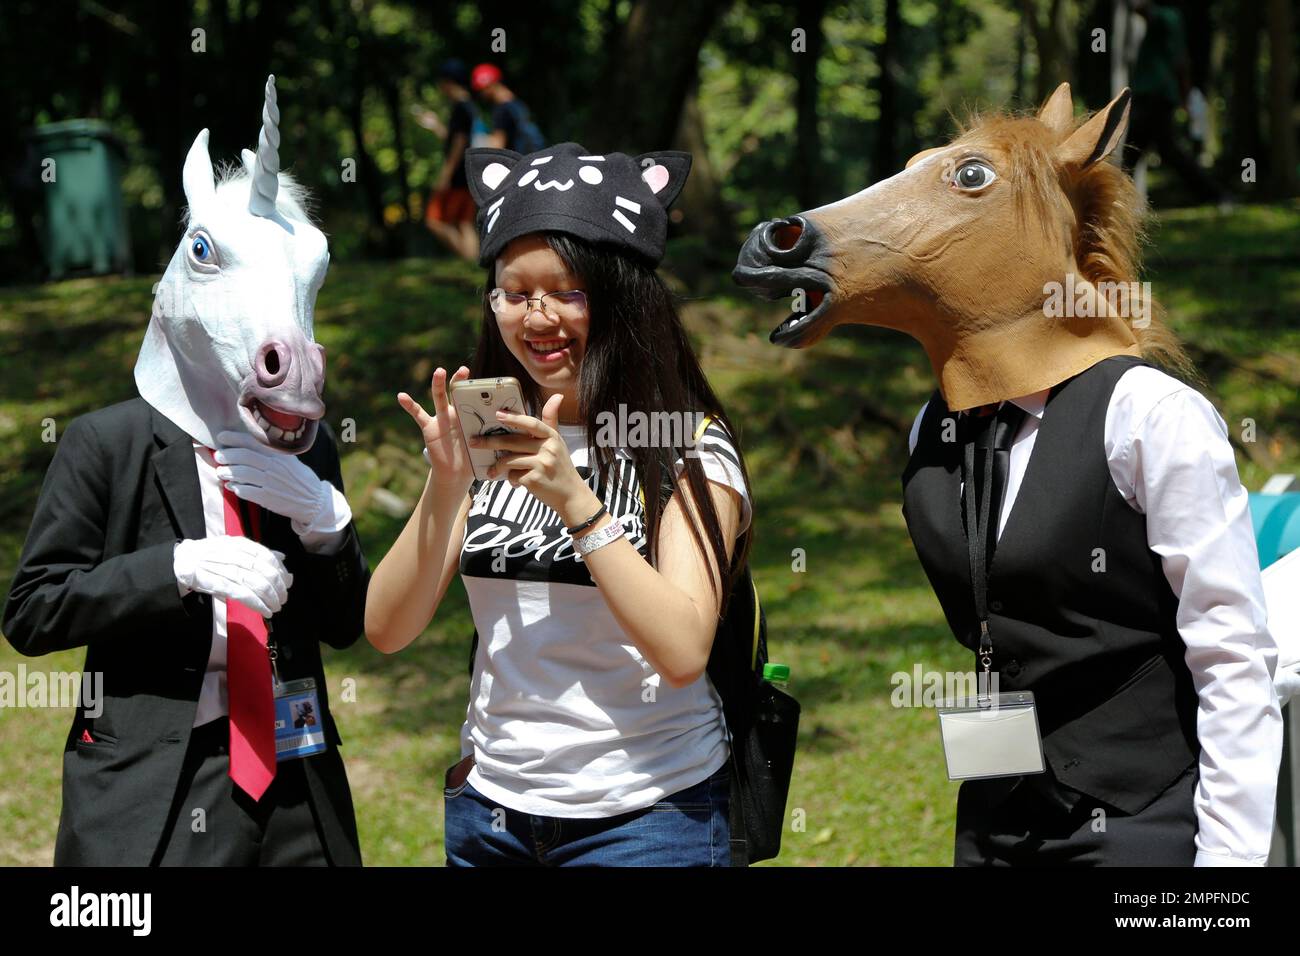 People take part in a cosplay event at Kuala Lumpur Convention Centre in Kuala Lumpur, Malaysia, Saturday, Dec. 16, 2017. Cosplay is short for Costume Play, a hobby where players wear costumes and accessories to resemble popular characters. (AP Photo/Sadiq Asyraf) Stock Photo